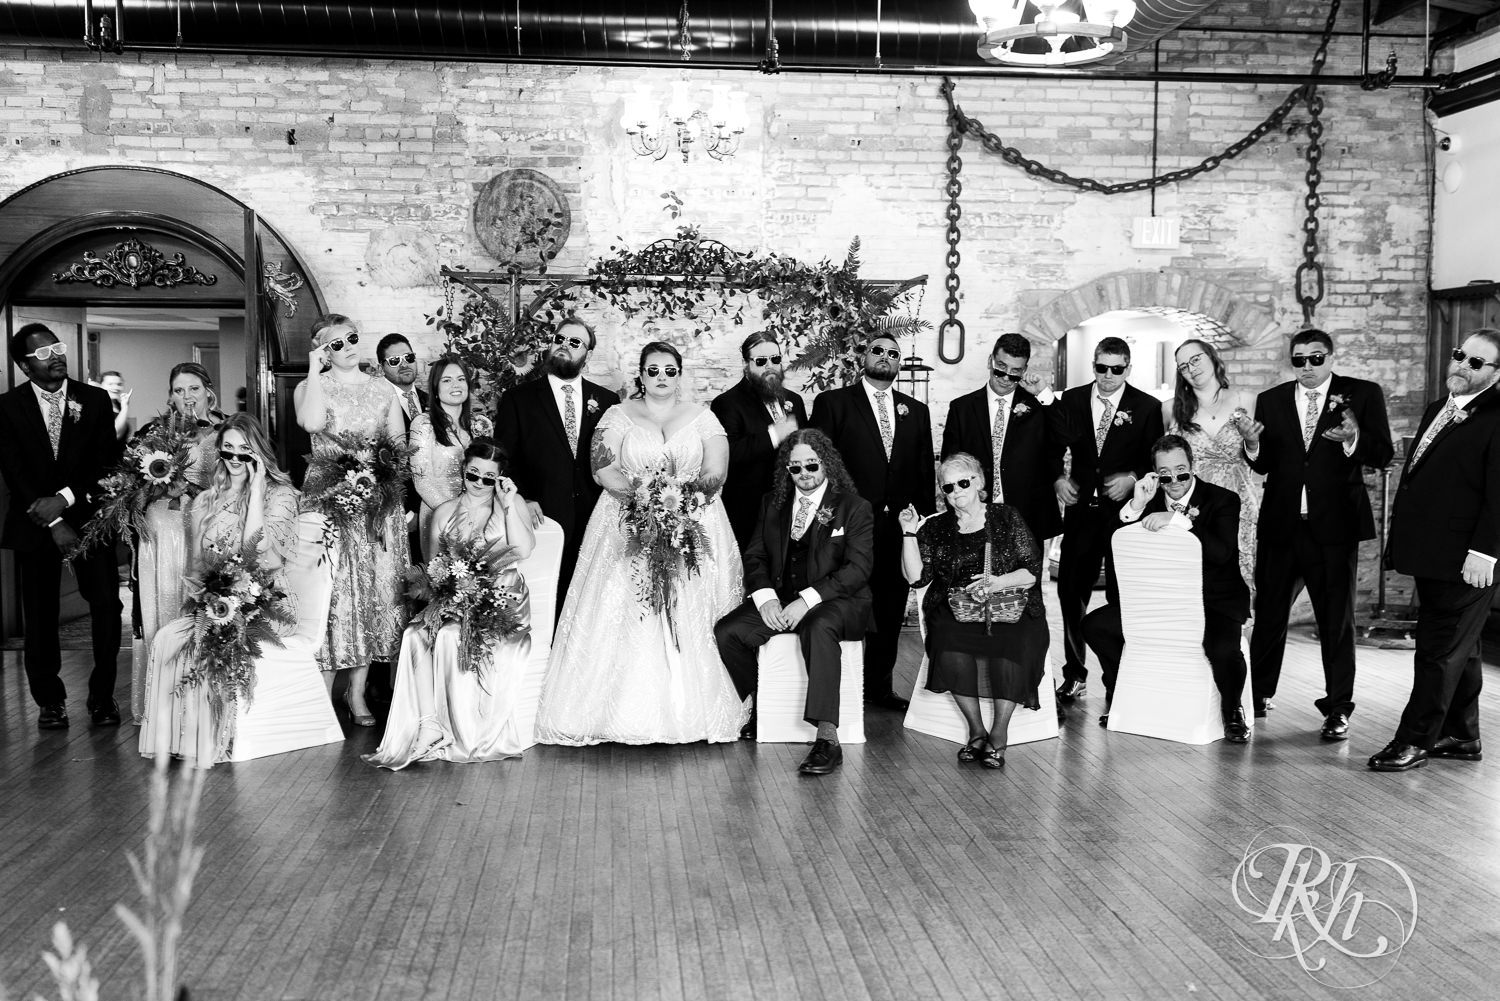 Plus size bride and groom smile wearing sunglasses with wedding party at Kellerman's Event Center in White Bear Lake, Minnesota.